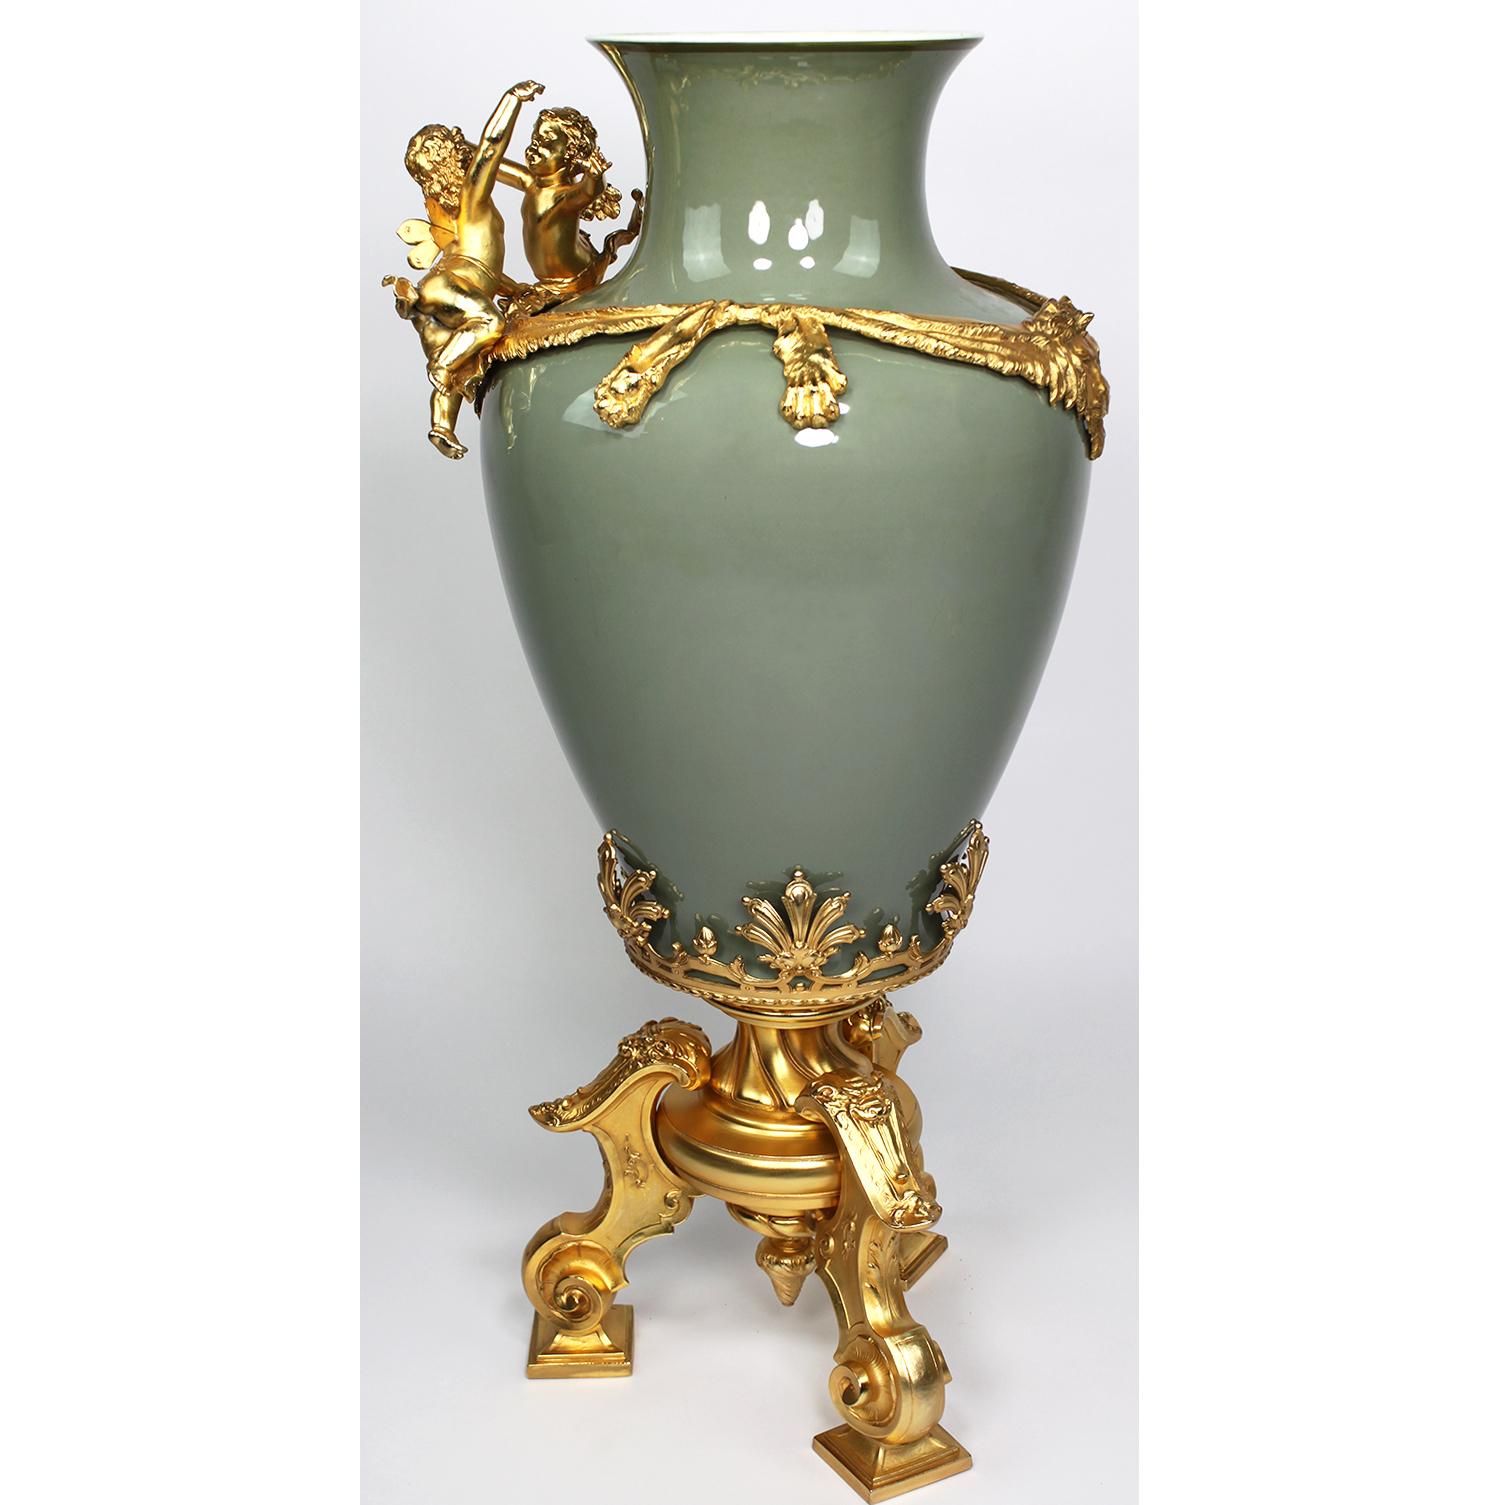 Romantic Continental 19th-20th Century Porcelain and Gilt Metal Mounted Vase with Cherubs